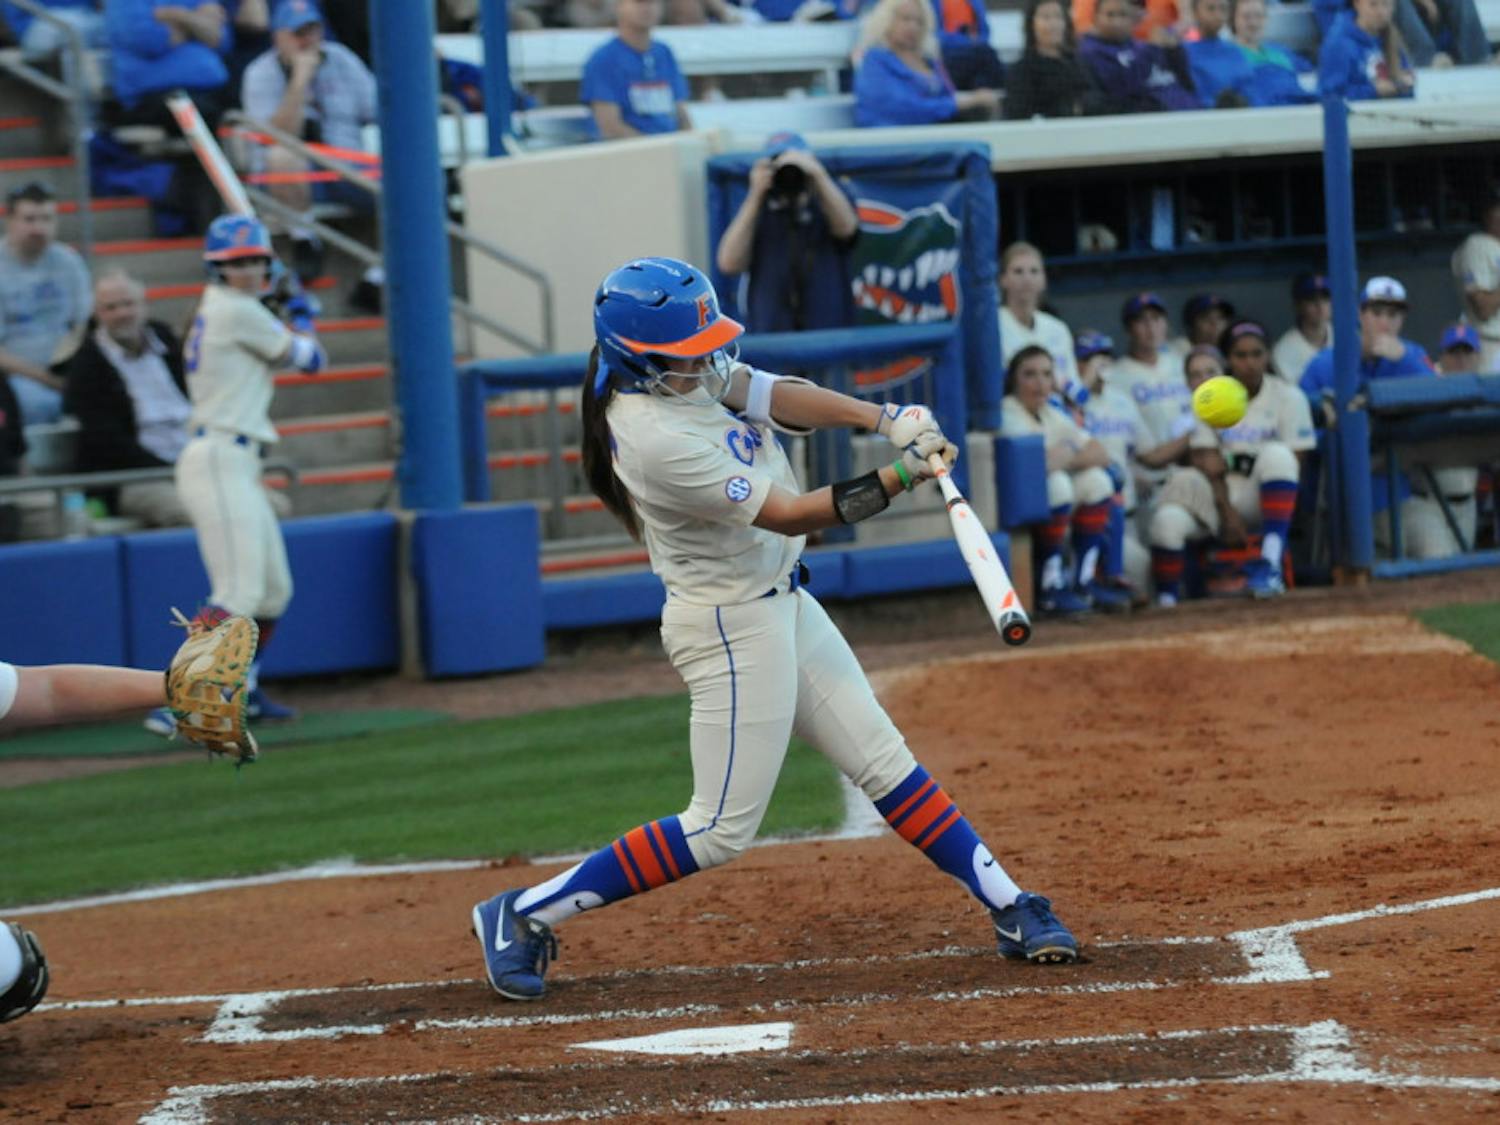 Janell Wheaton notched a walk-off walk to seal the game for the Gators early Friday morning.